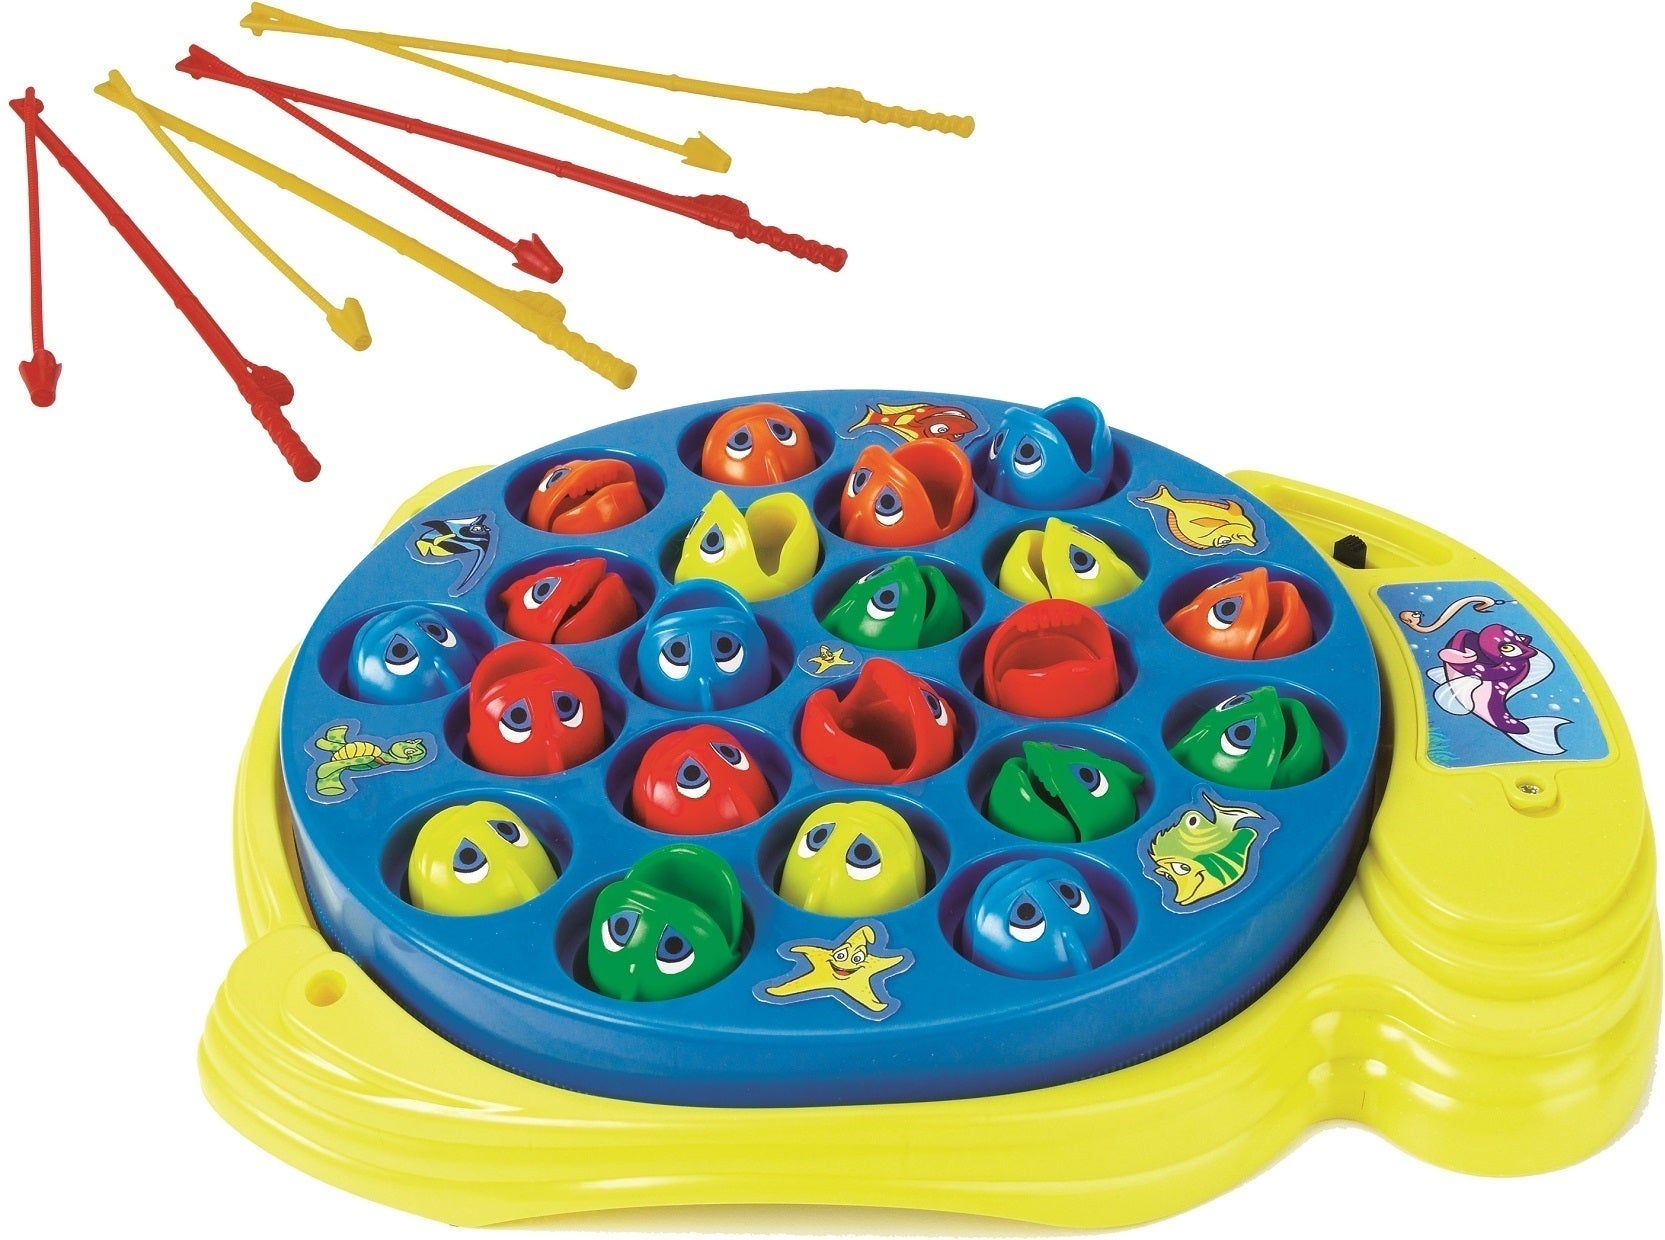 Fishing Game Play Set,fishing Toy With Toddler Fishing Pole 1pc